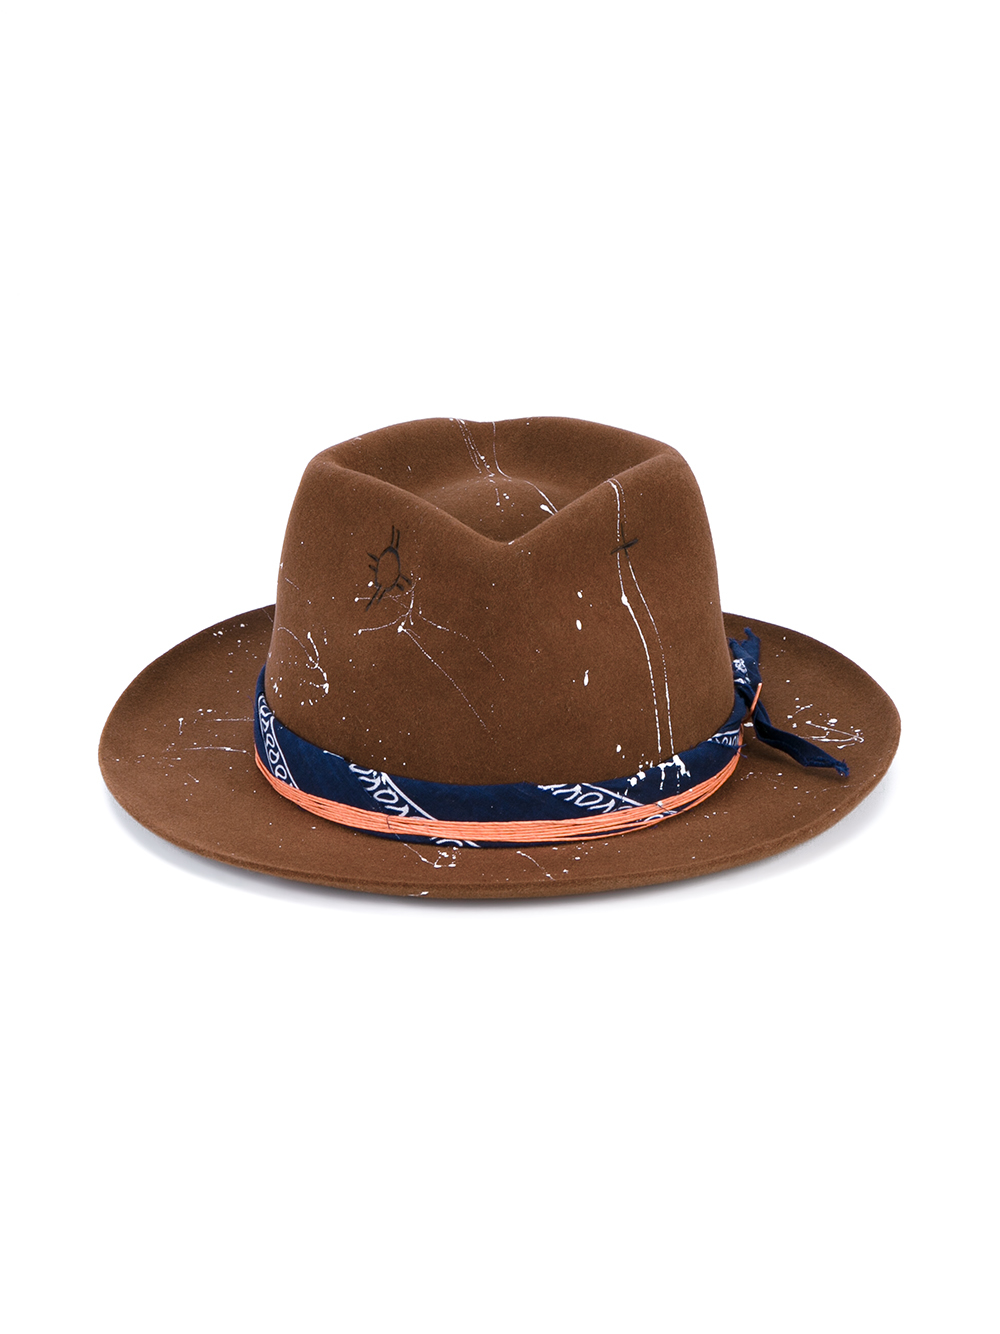 Lyst - Nick Fouquet Maritime Hat in Brown for Men